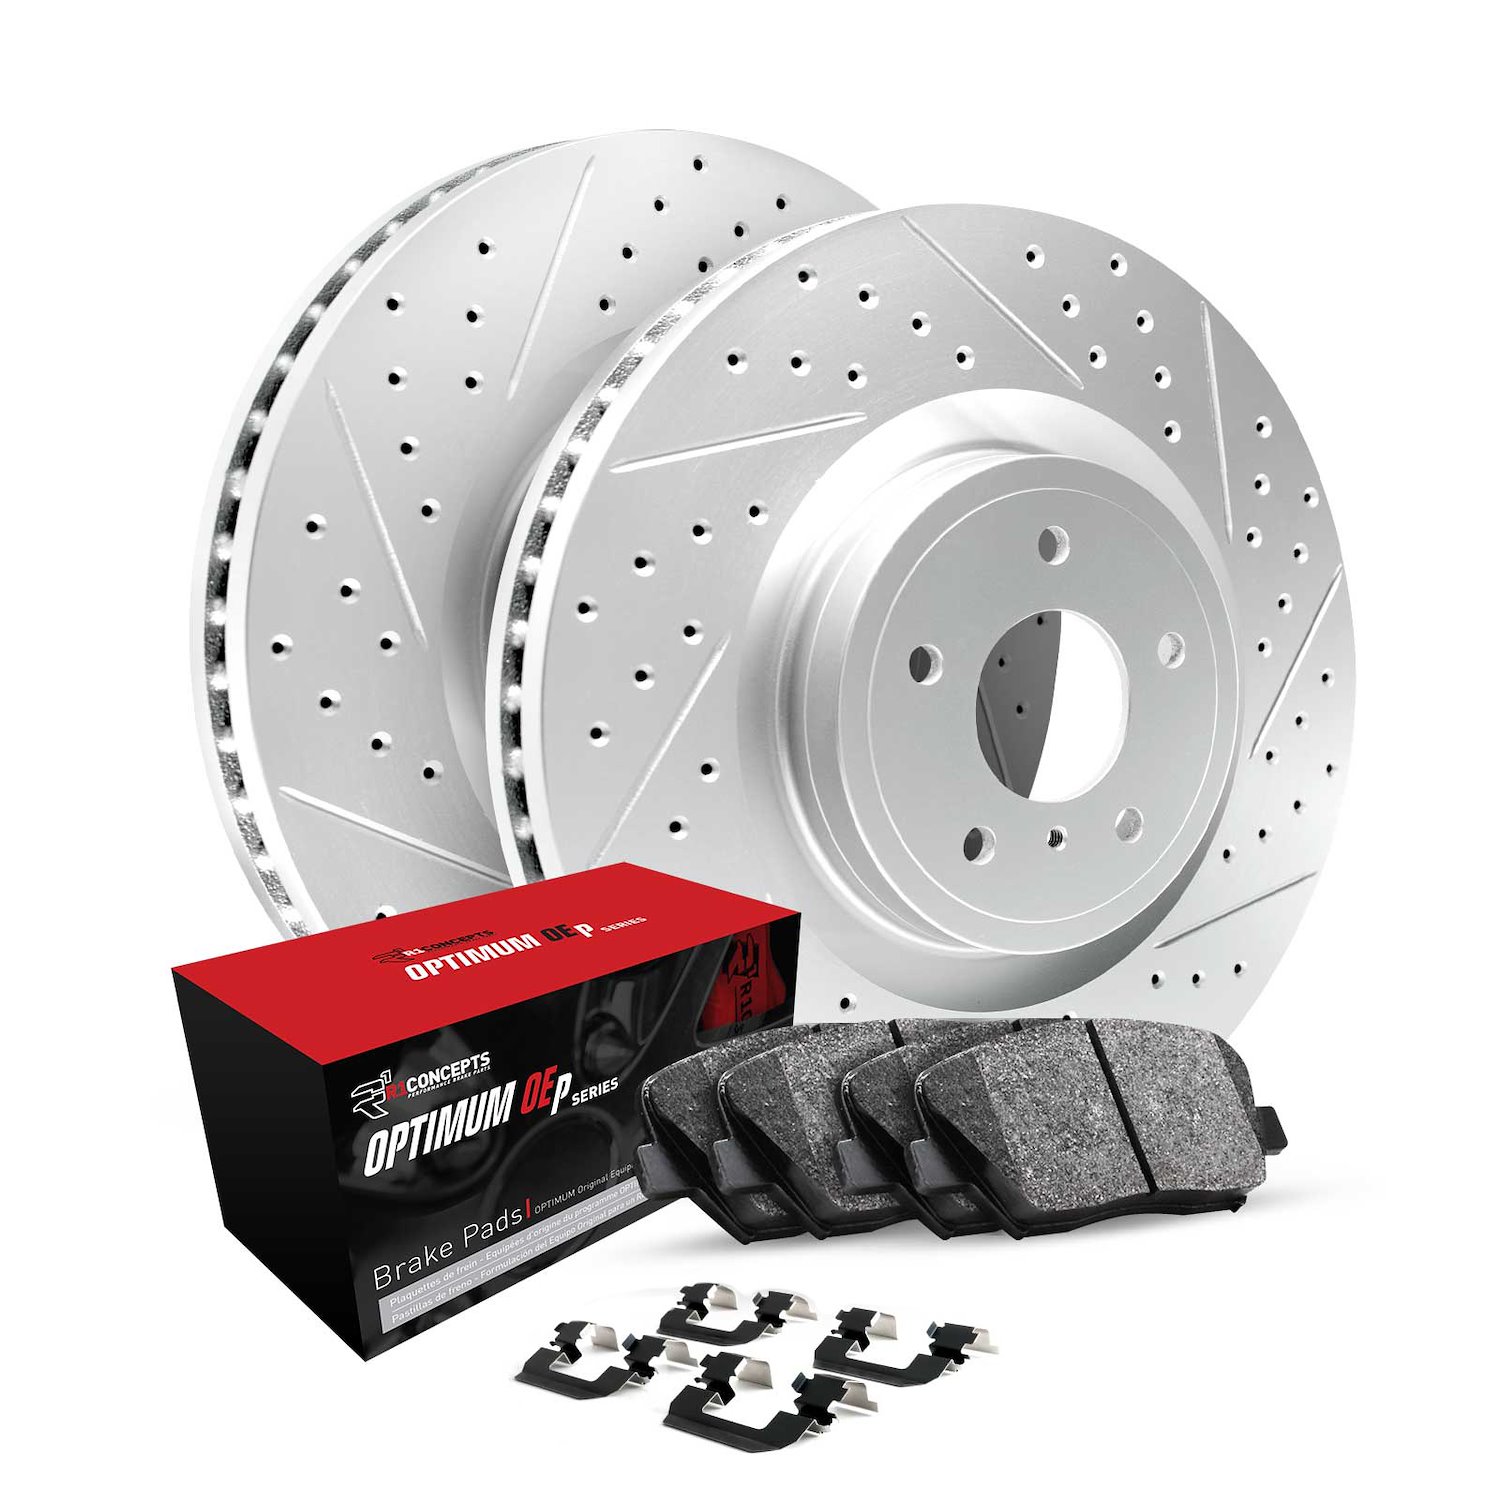 GEO-Carbon Drilled & Slotted Brake Rotor Set w/Optimum OE Pads & Hardware, 2008-2019 Fits Multiple Makes/Models